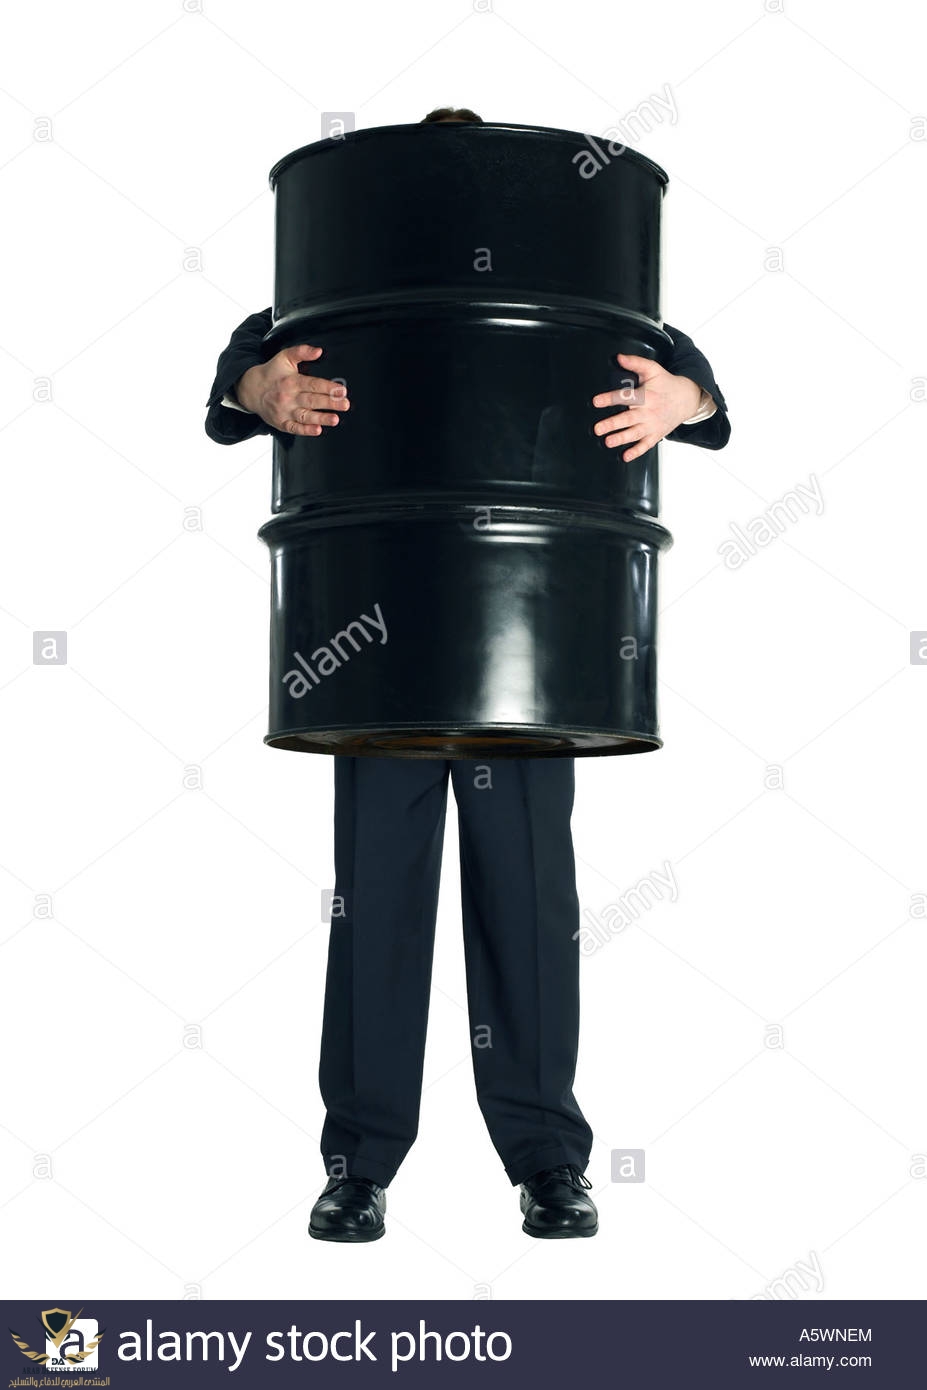 business-man-with-oil-drum-A5WNEM.jpg